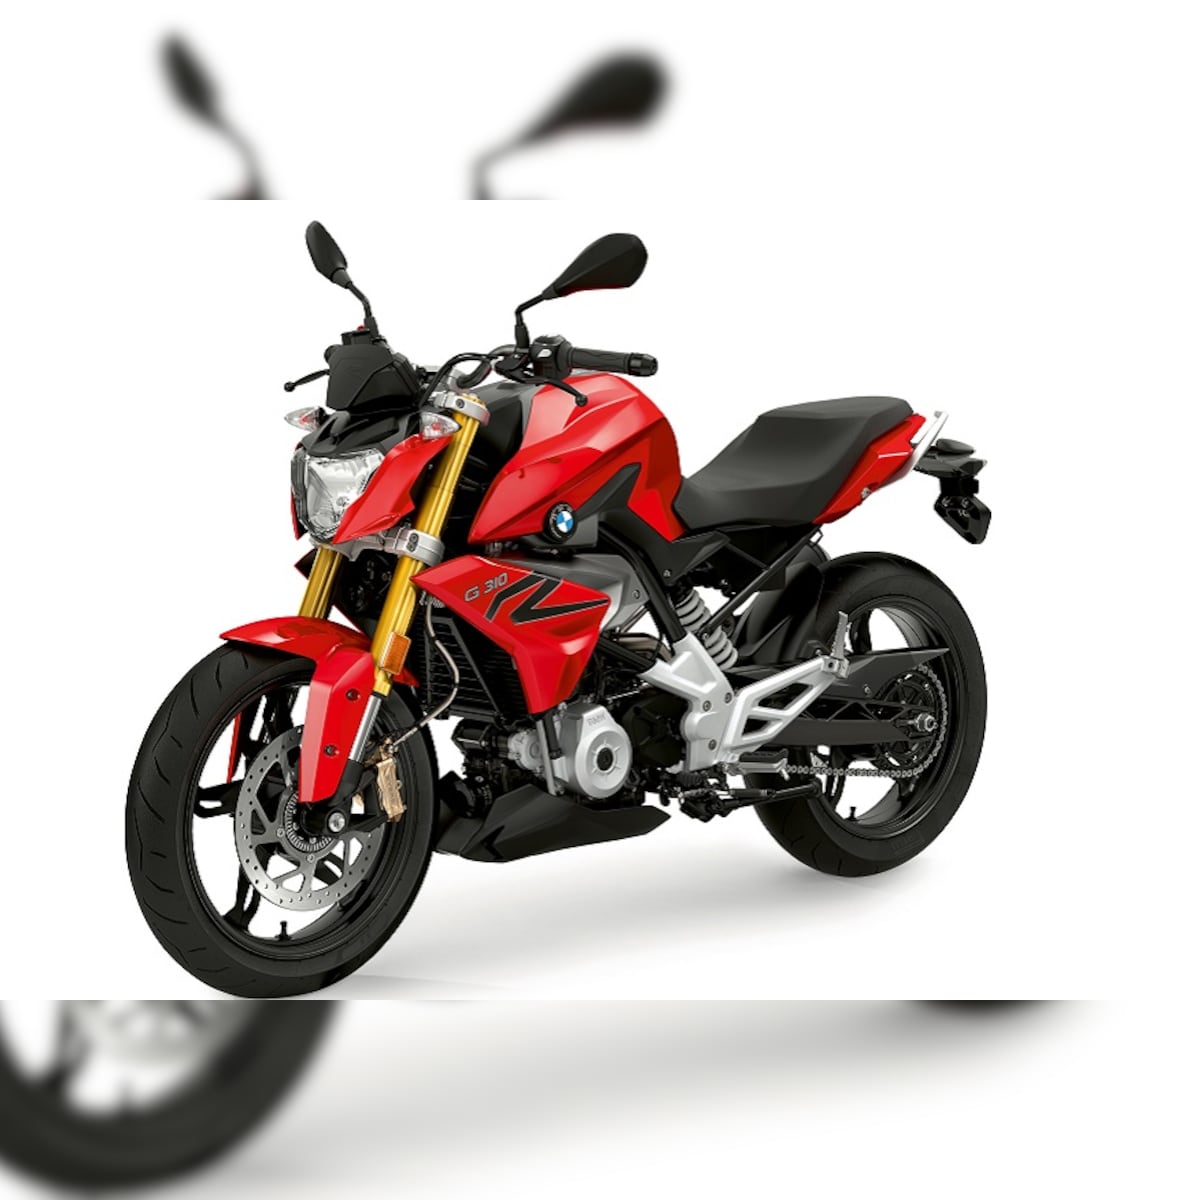 Bmw G 310 R And G 310 Gs To Launch In India Today Watch It Live Here Video